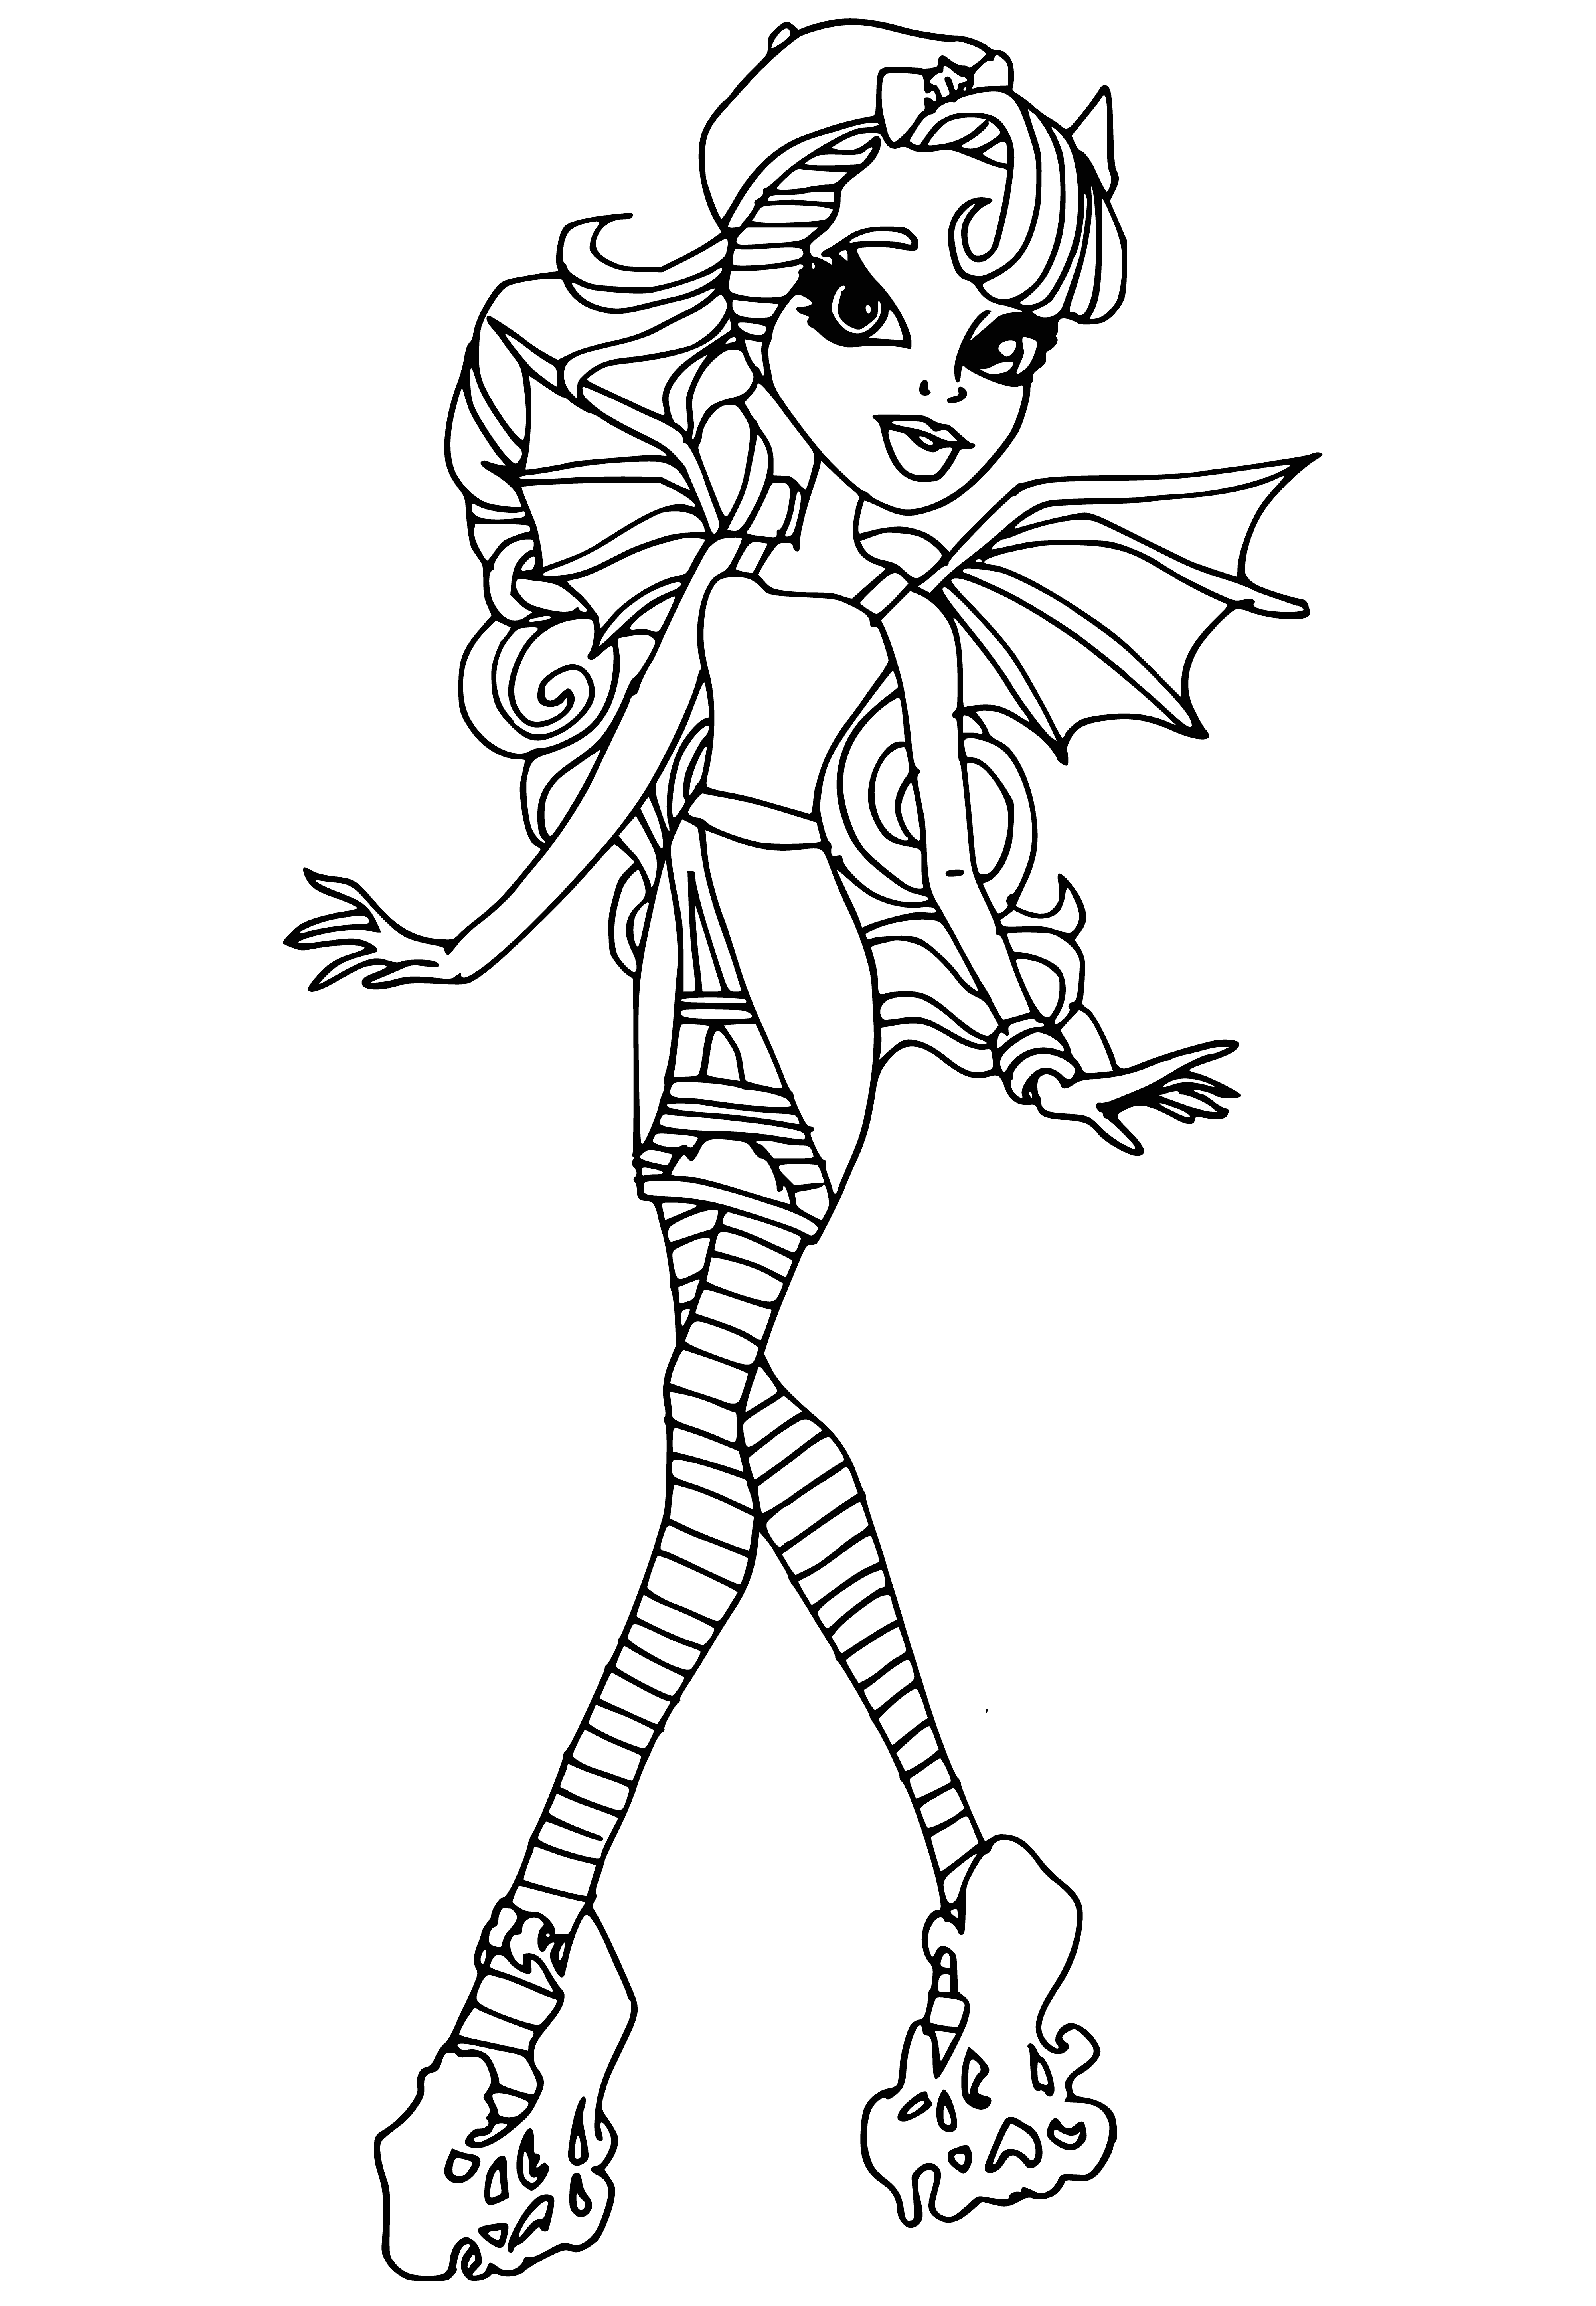 coloring page: She is elegant in an all black look; ponytail, bow, dress w/ side slit & fan. Pale skin & purple eyes complete the look.